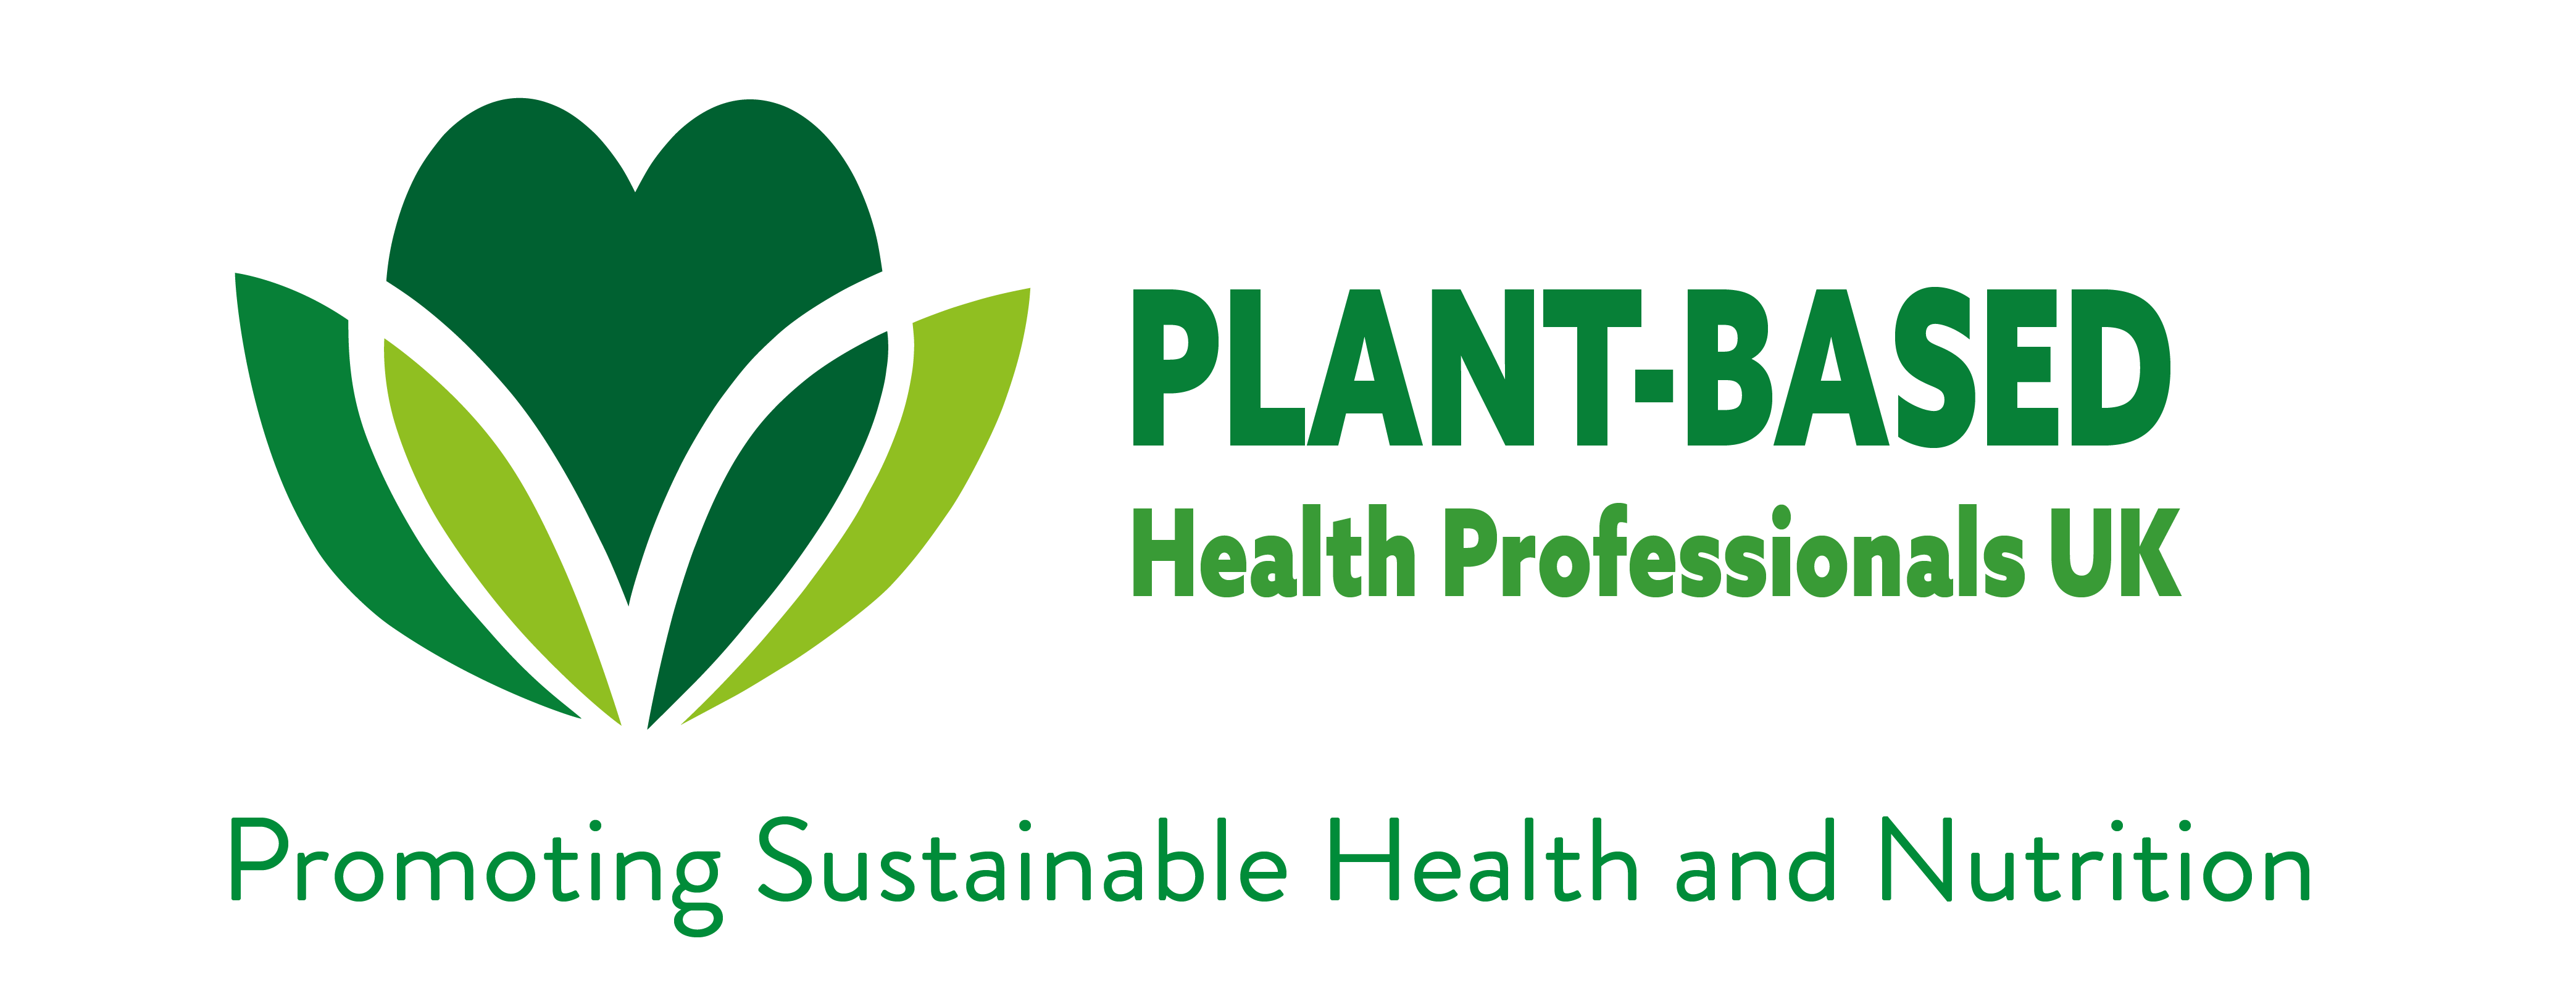 Supporter | Planted-Based Health Professionals UK